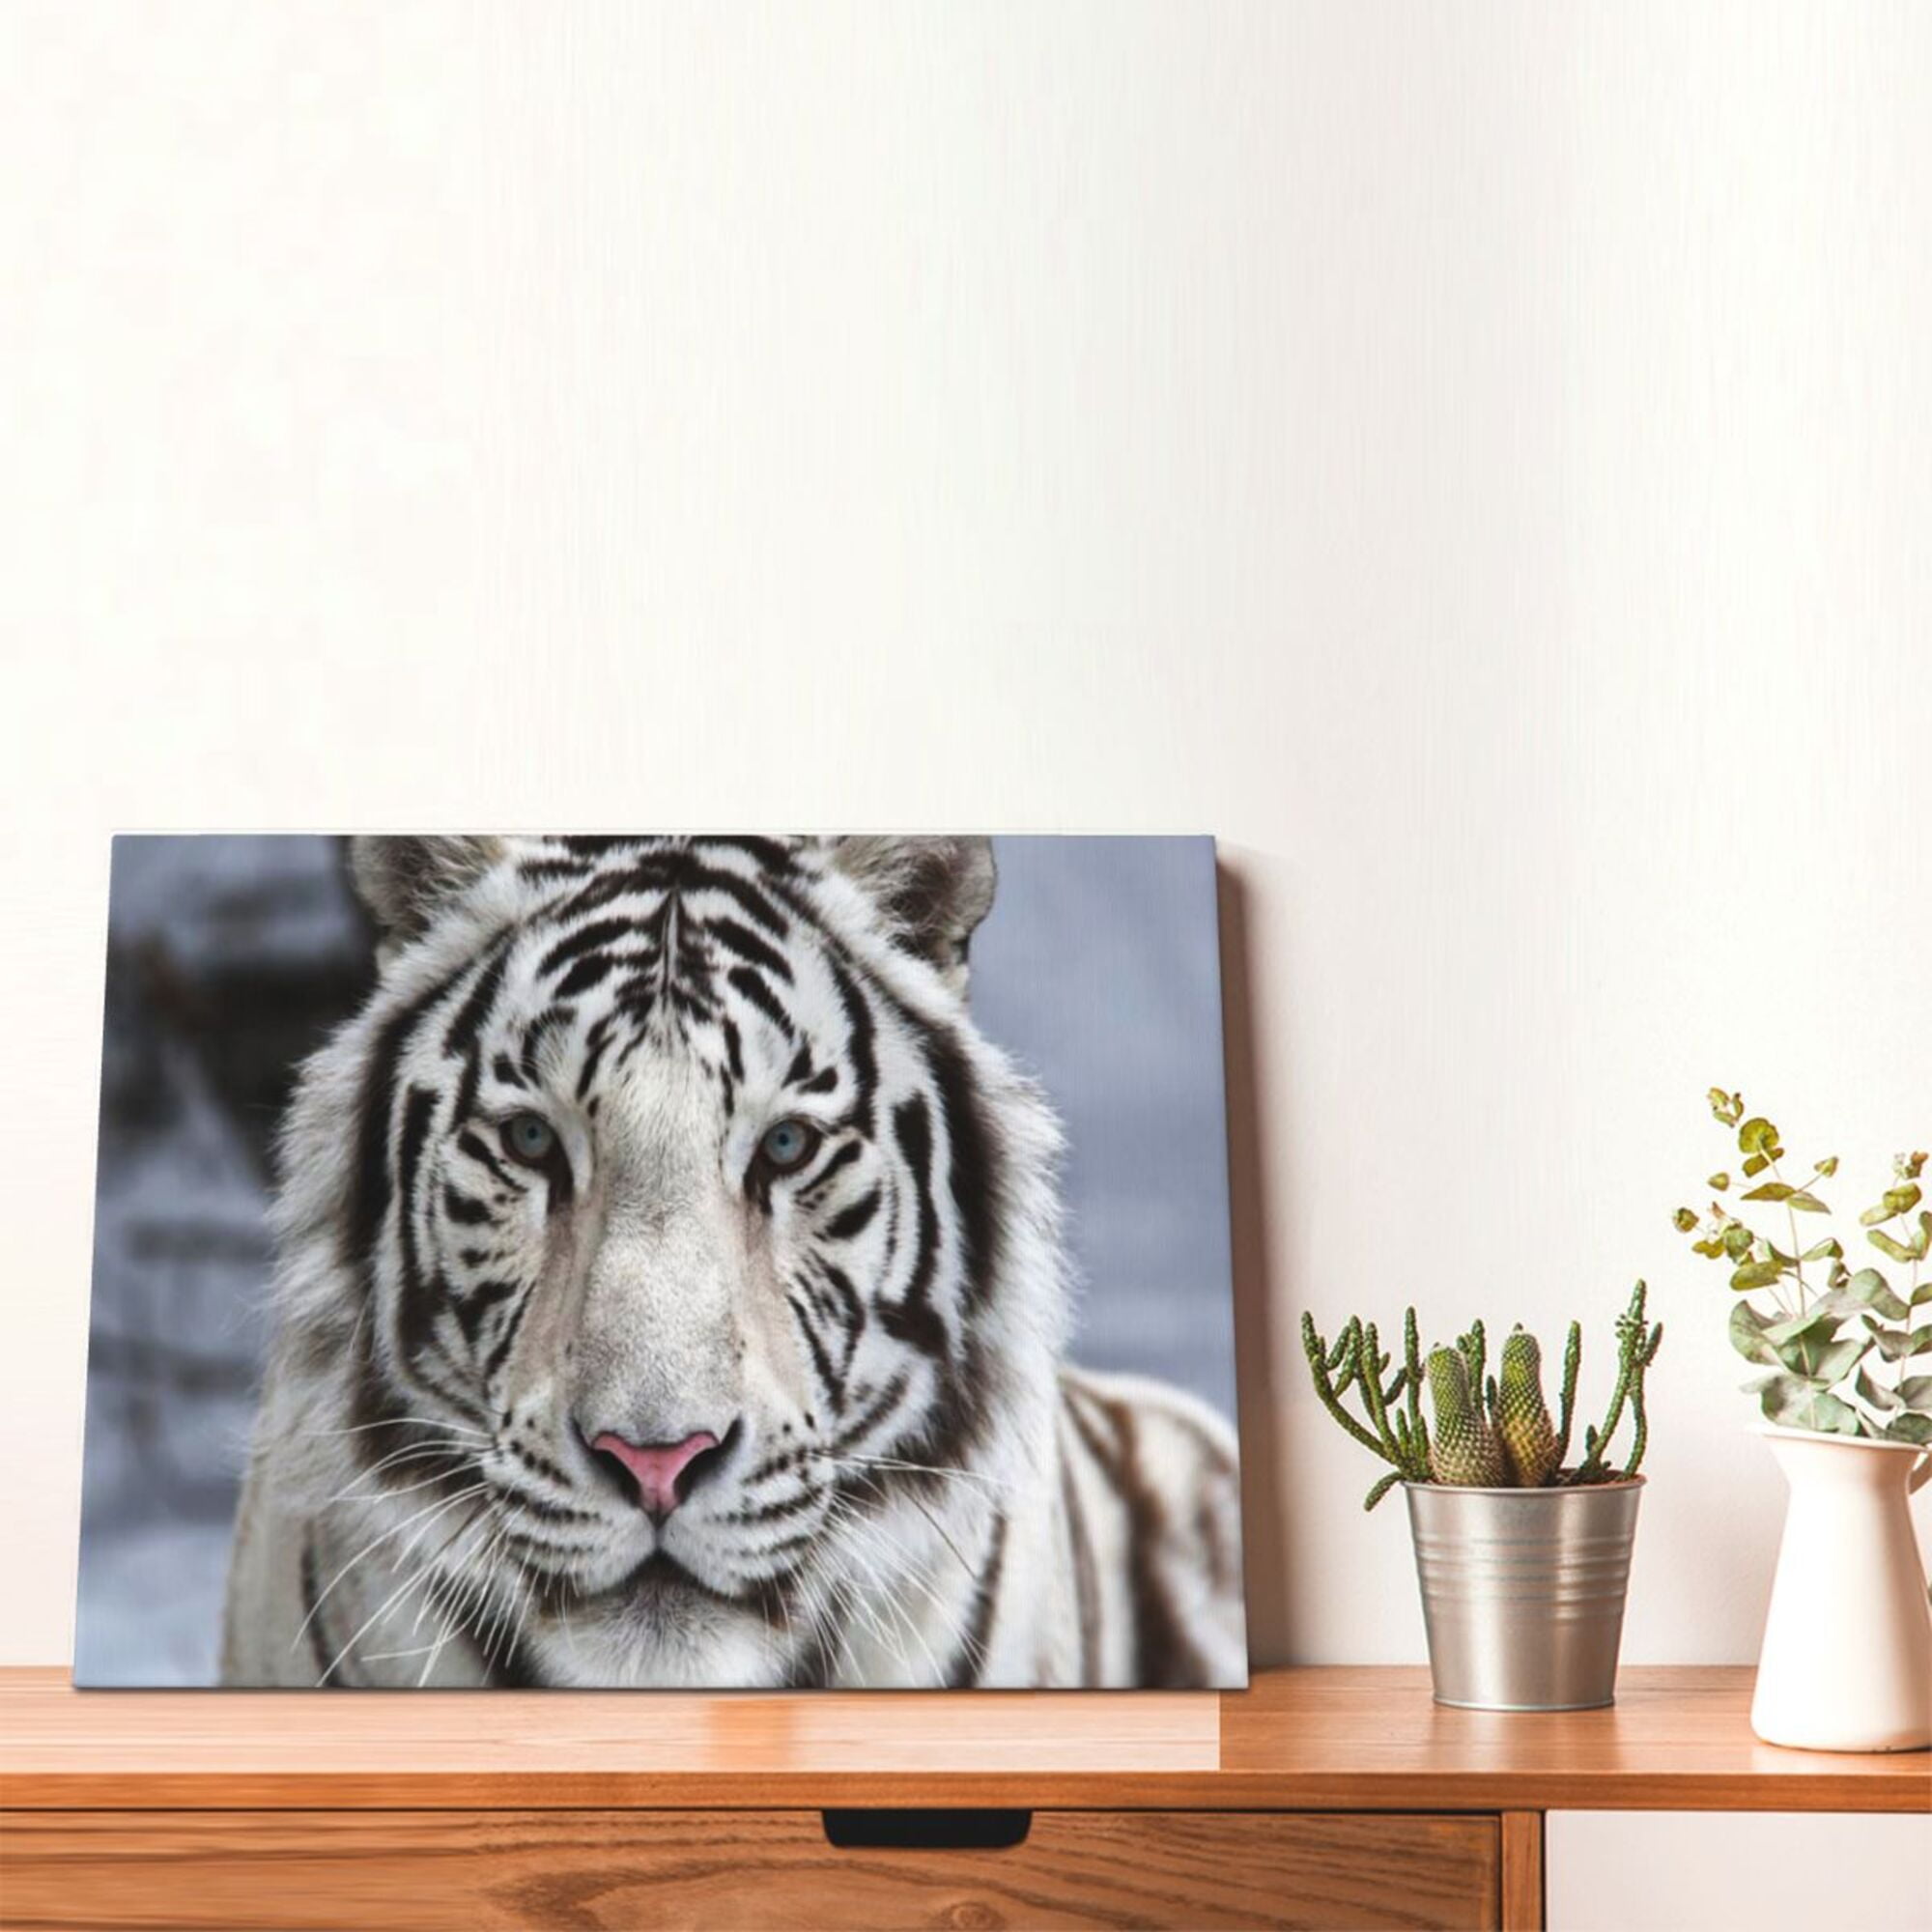 Decor White Tiger Wall Decor Bathroom Canvas Painting Modern Decorations  Framed Artwork For Bathroom Bedroom Living Room 12x16in